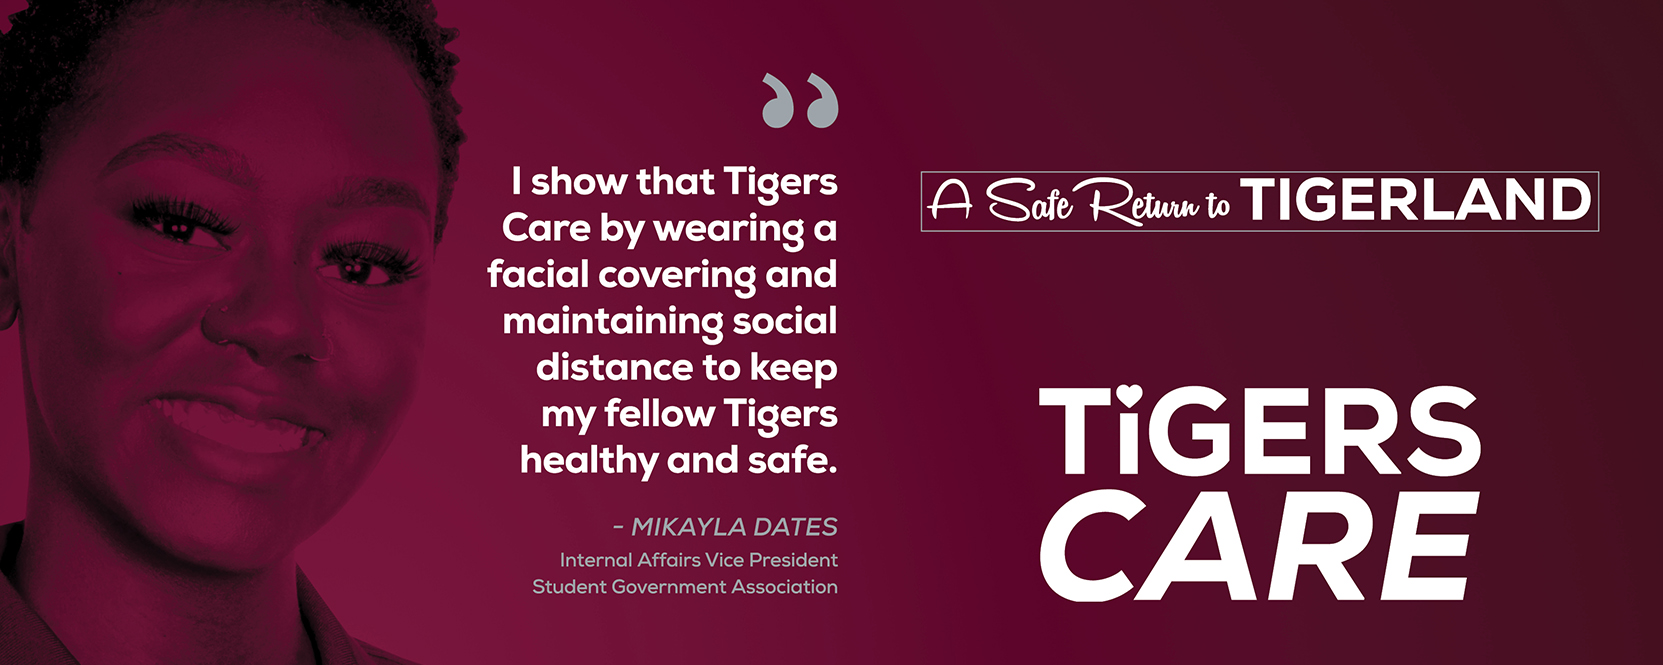 tigers care mikayala quote 